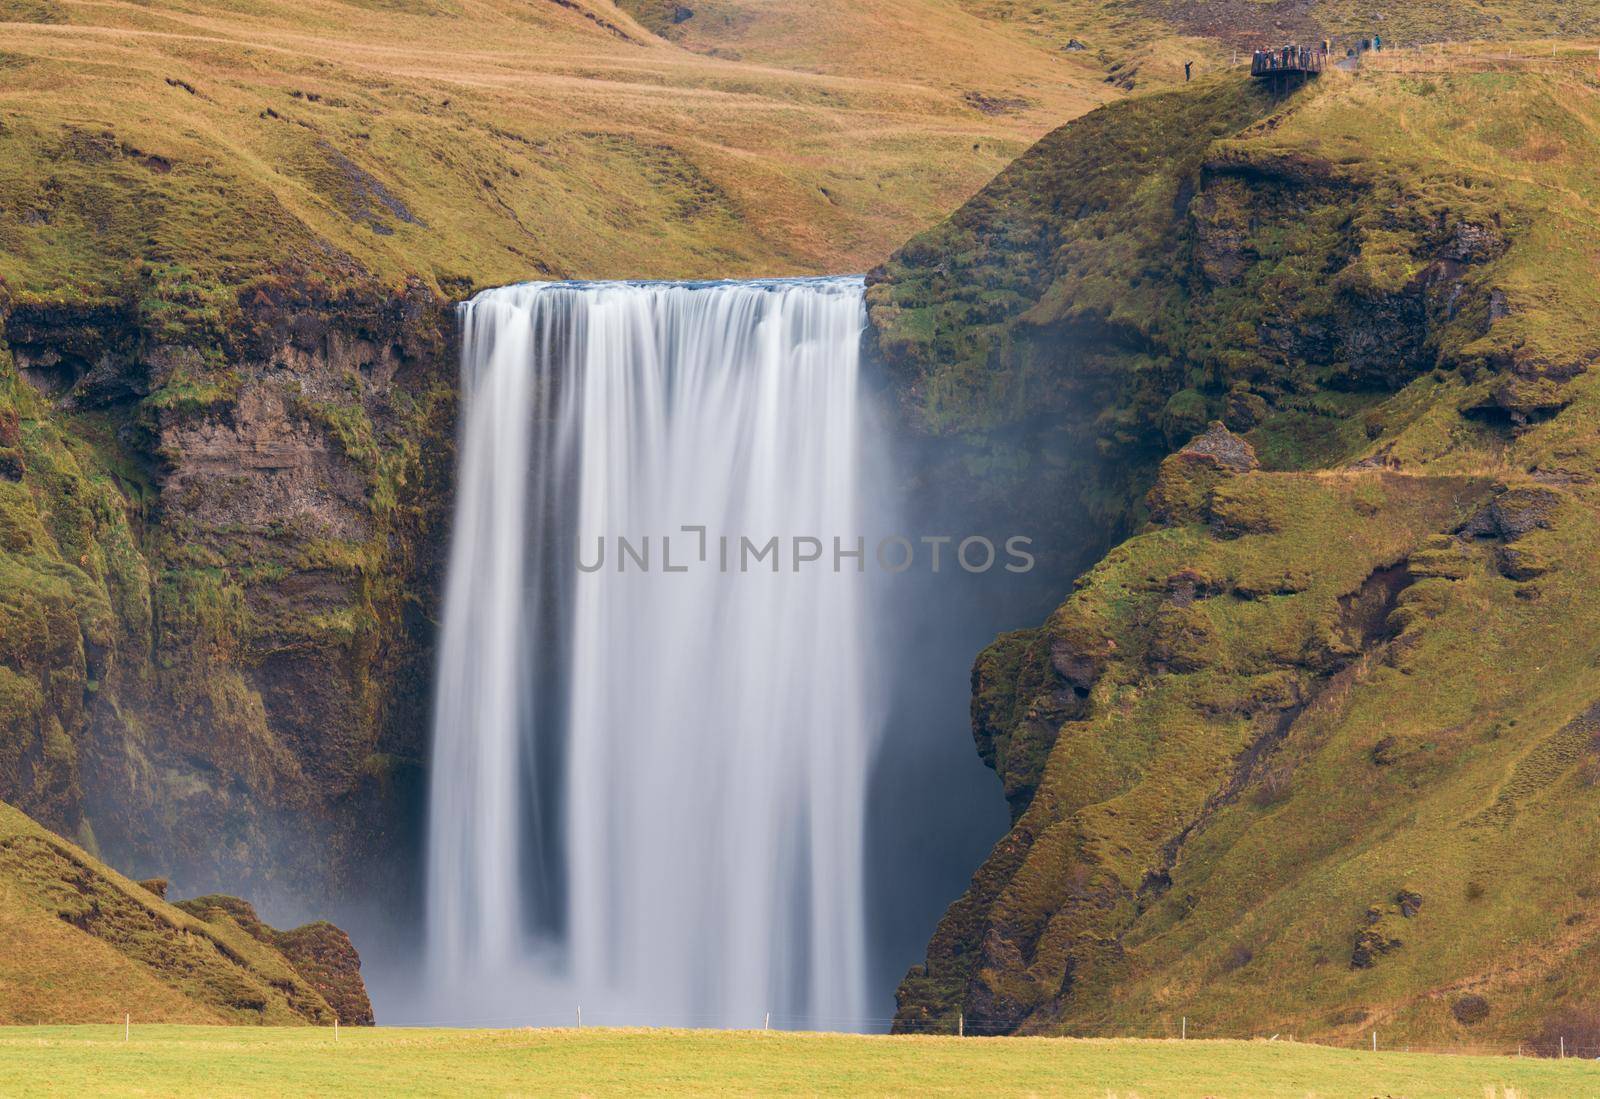 Long exposure, Skogafoss waterfall from the distance with hikers on top viewpoint by FerradalFCG